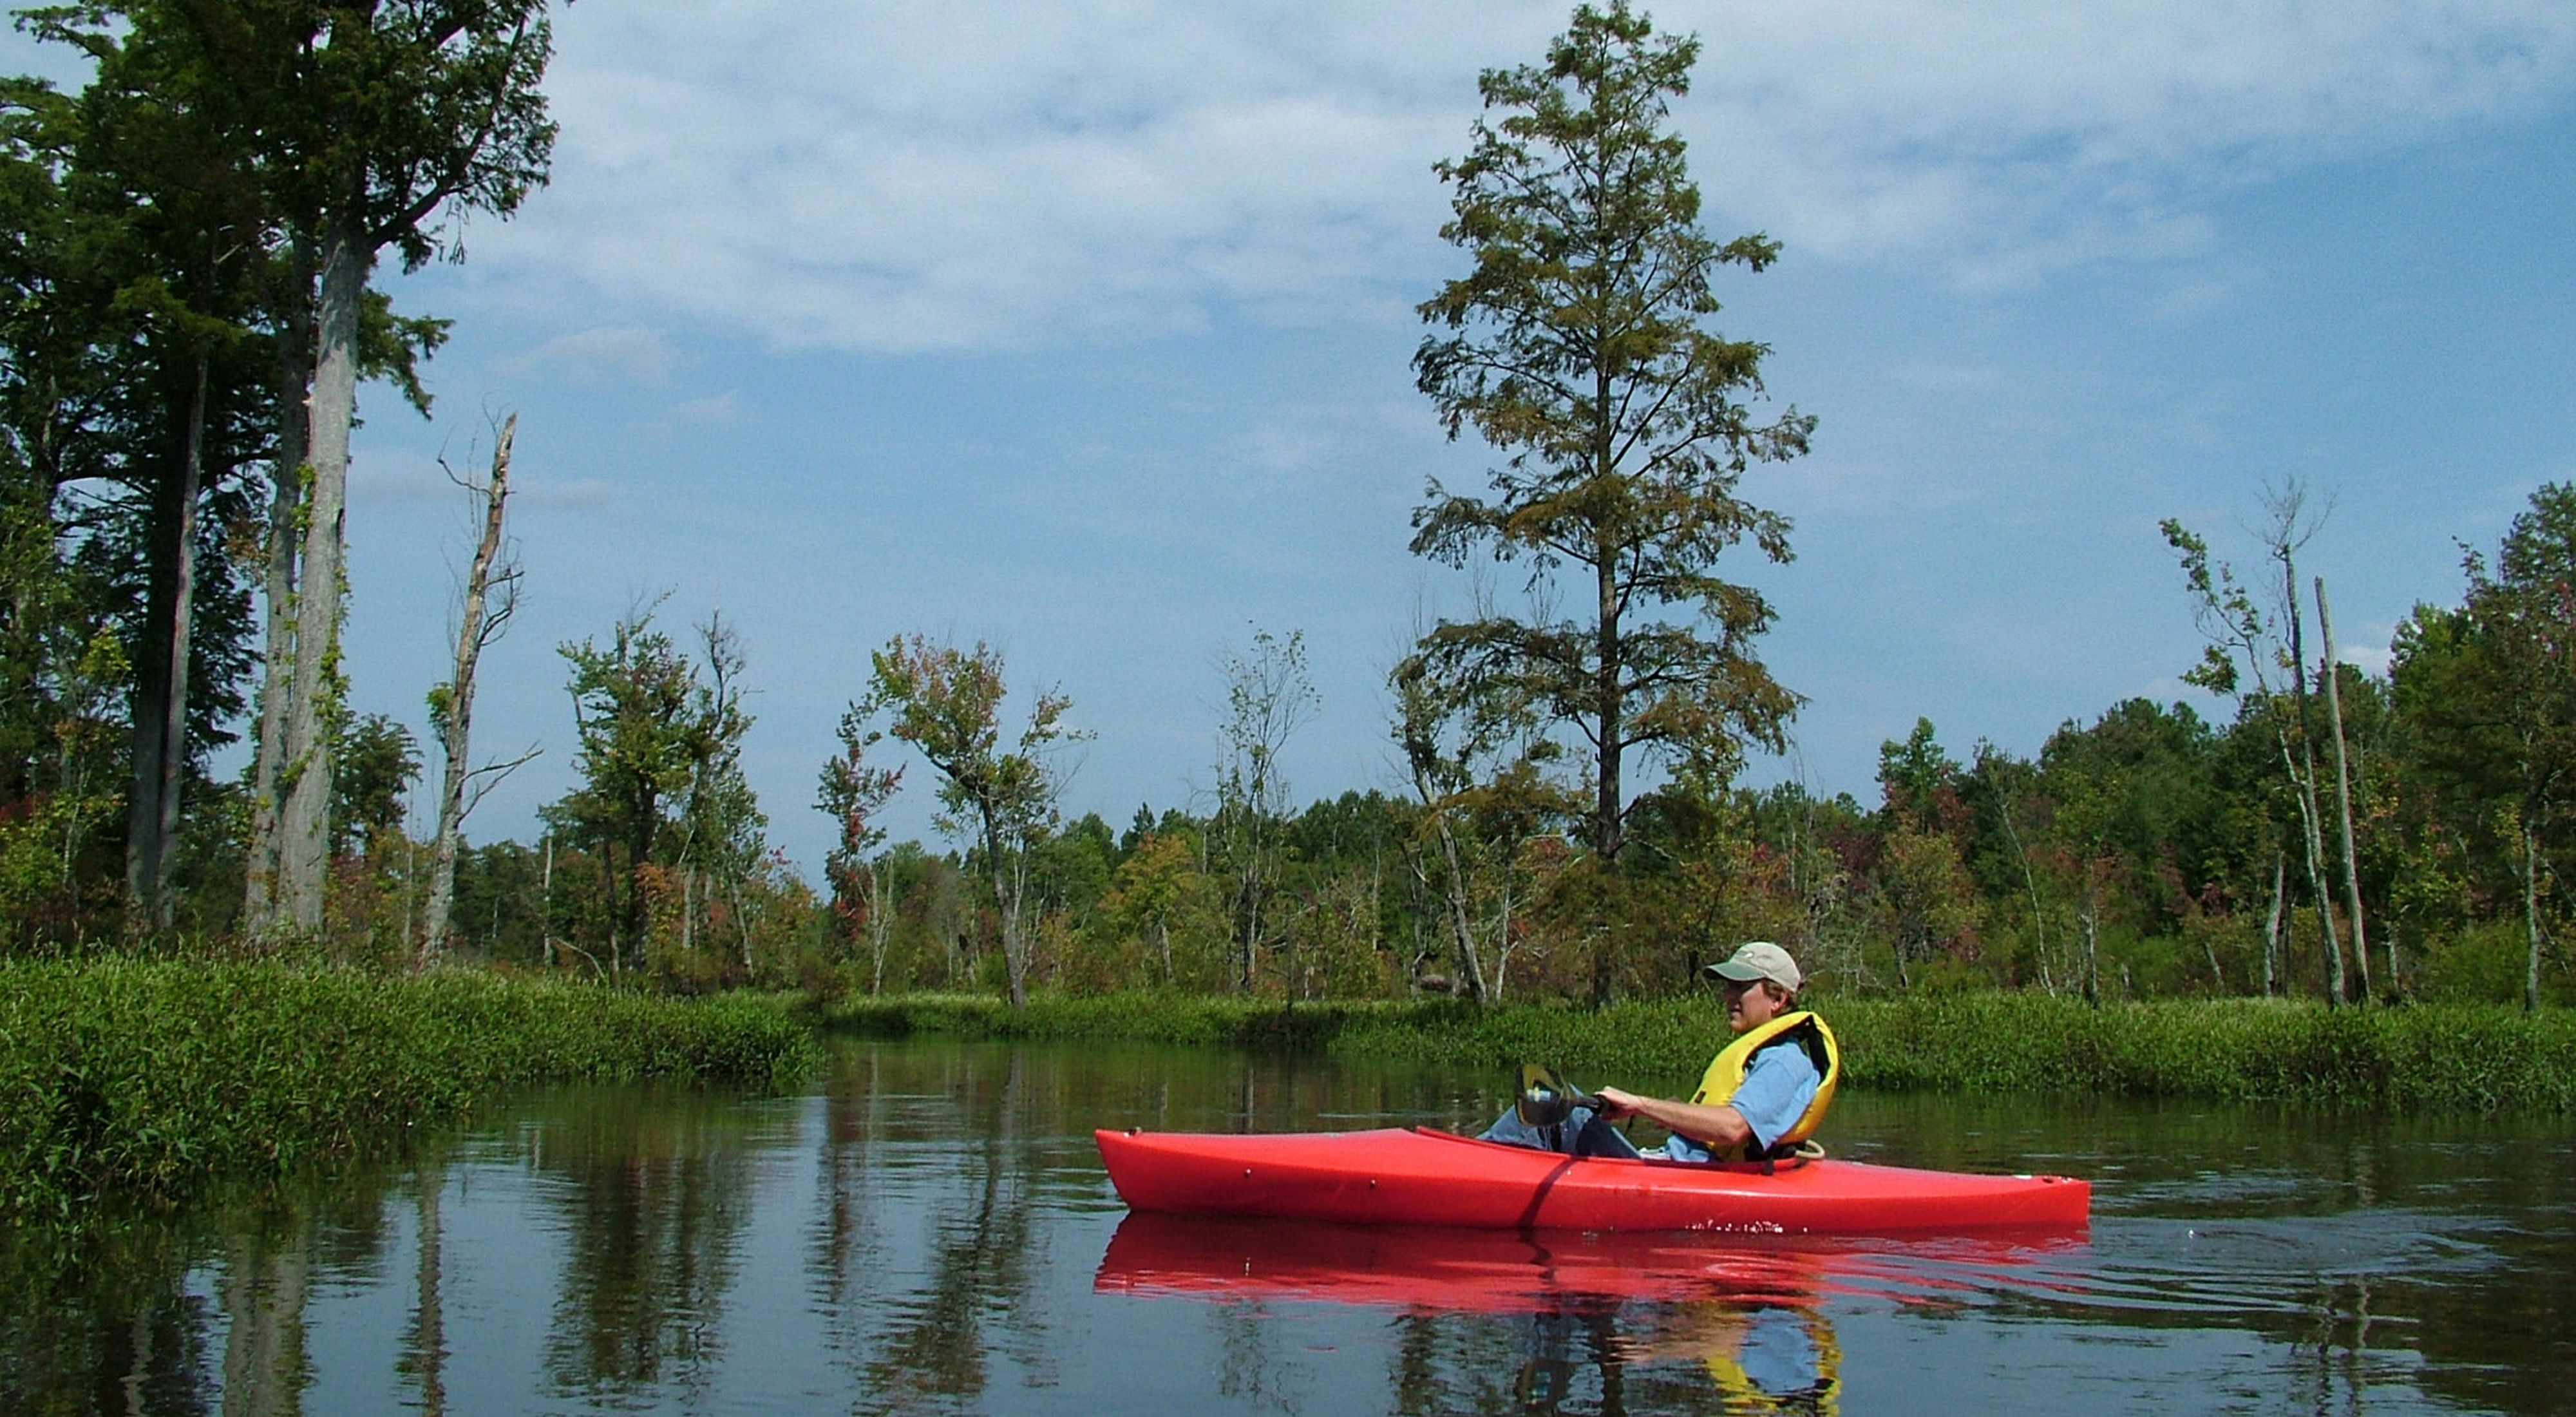 A man sitting in a red kayak wearing a yellow vest floats down a flat water stream. The wide channel is lined with tall cypress trees, some leafed out, some dead snags.